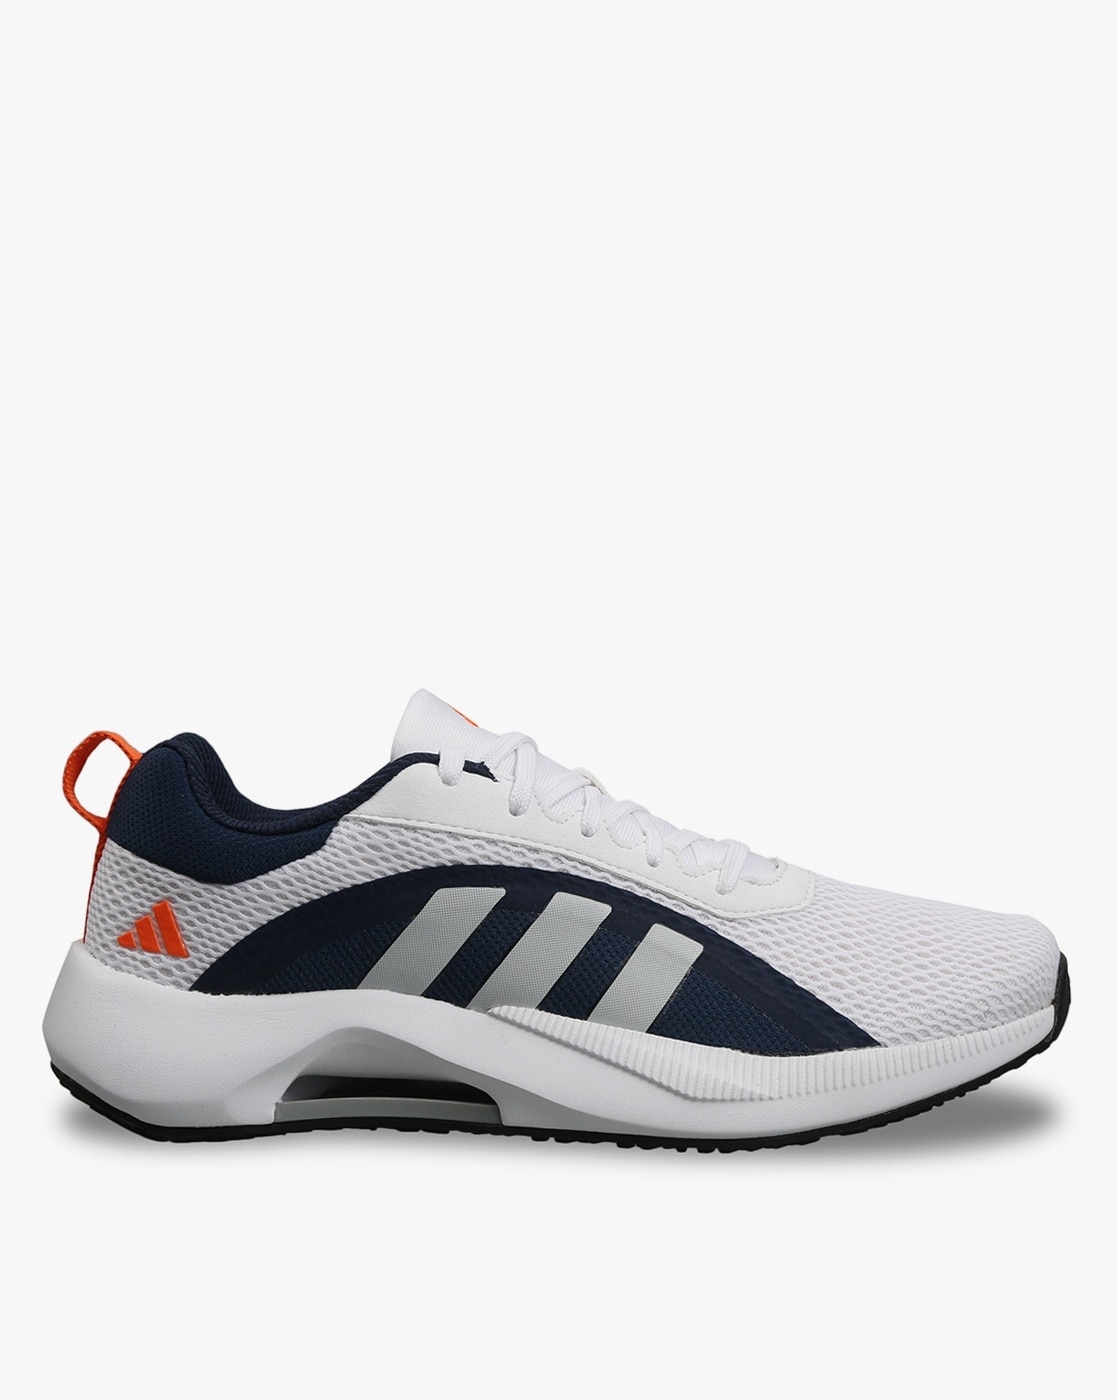 Adidas ZX 2000 Running Shoes